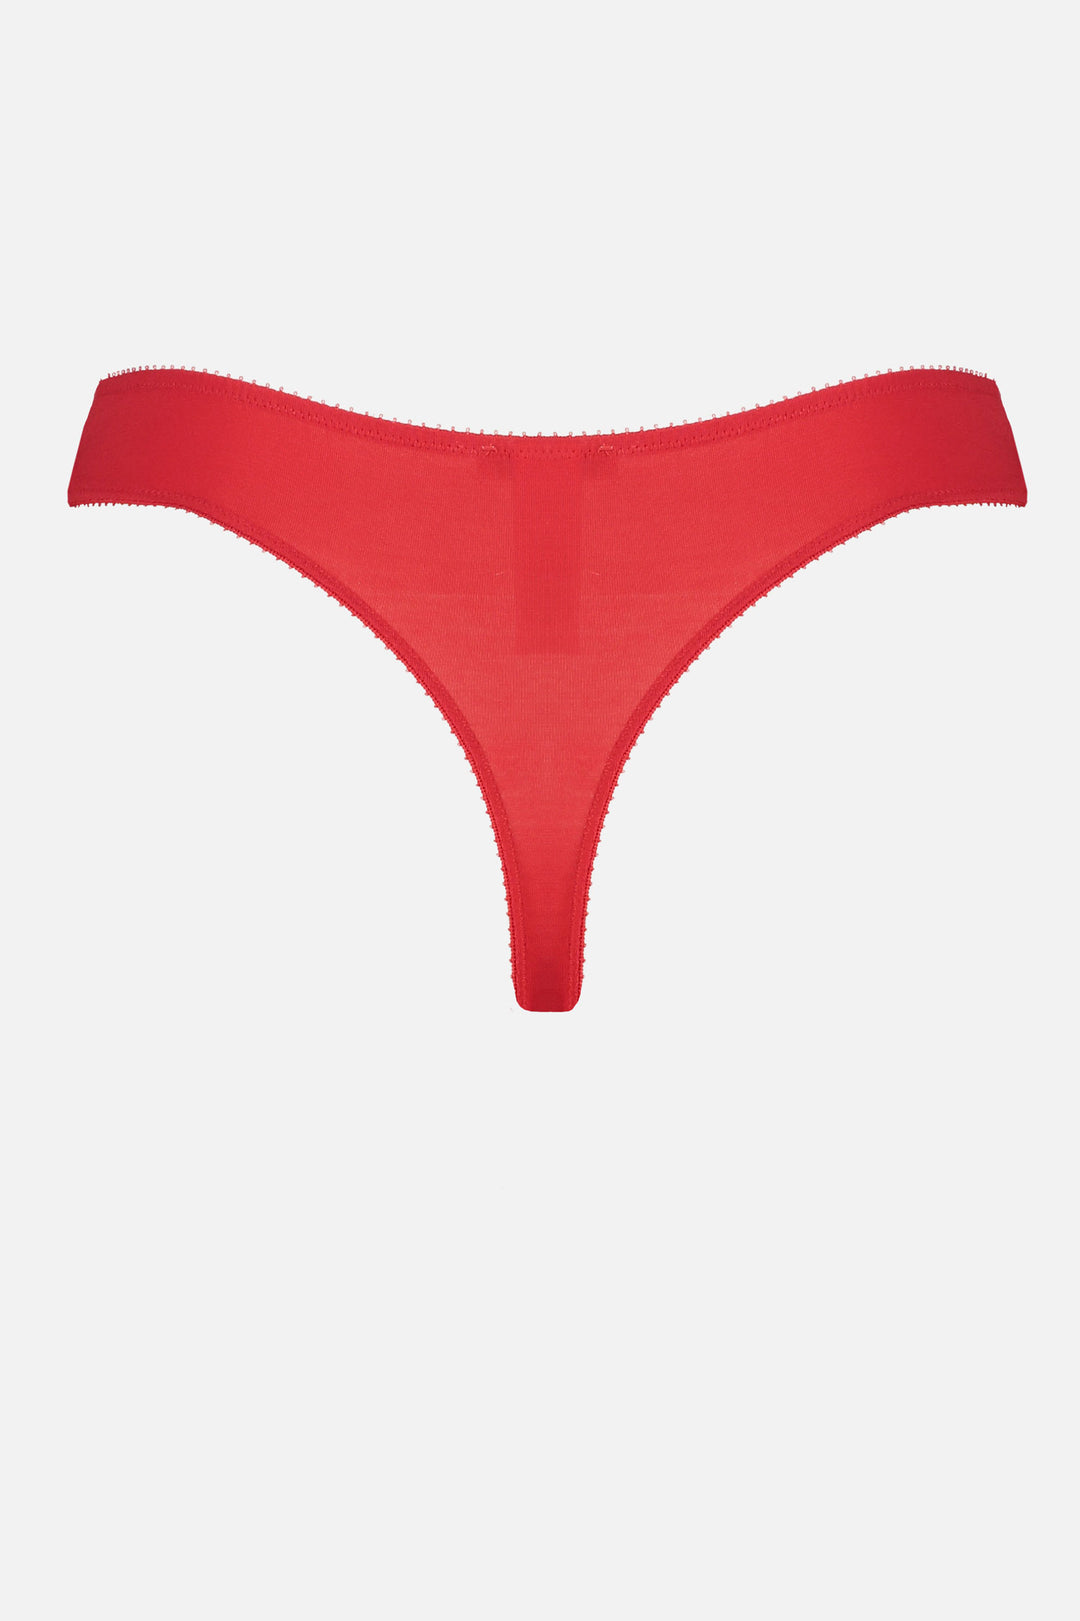 Videris Lingerie thong in red TENCEL™ a comfortable flattering wide g string back with soft elastics